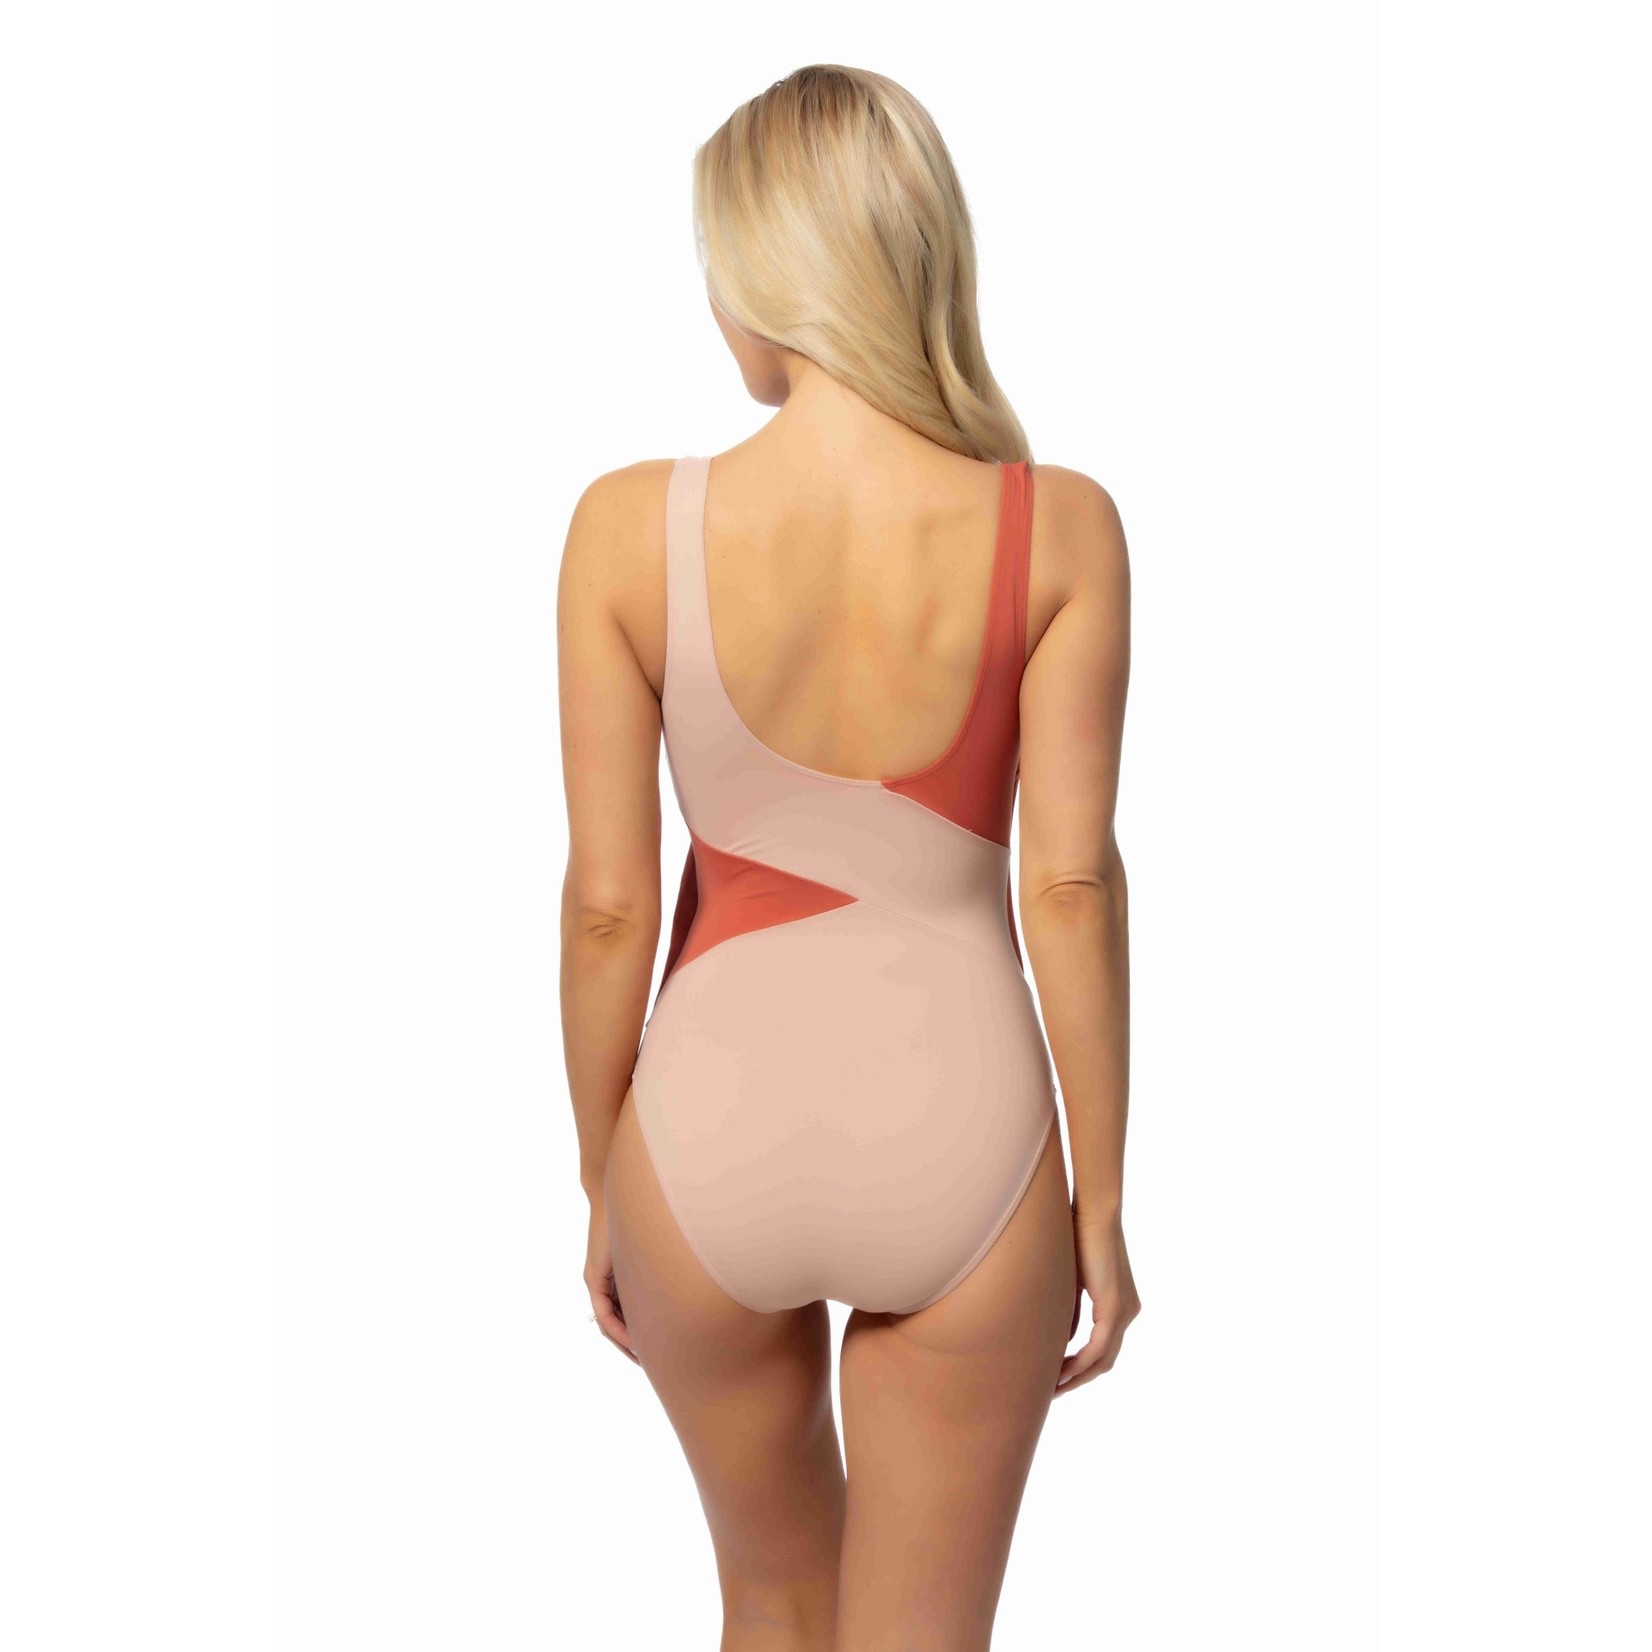 Ava One Piece With Side Tie - Sara Jane Boutique